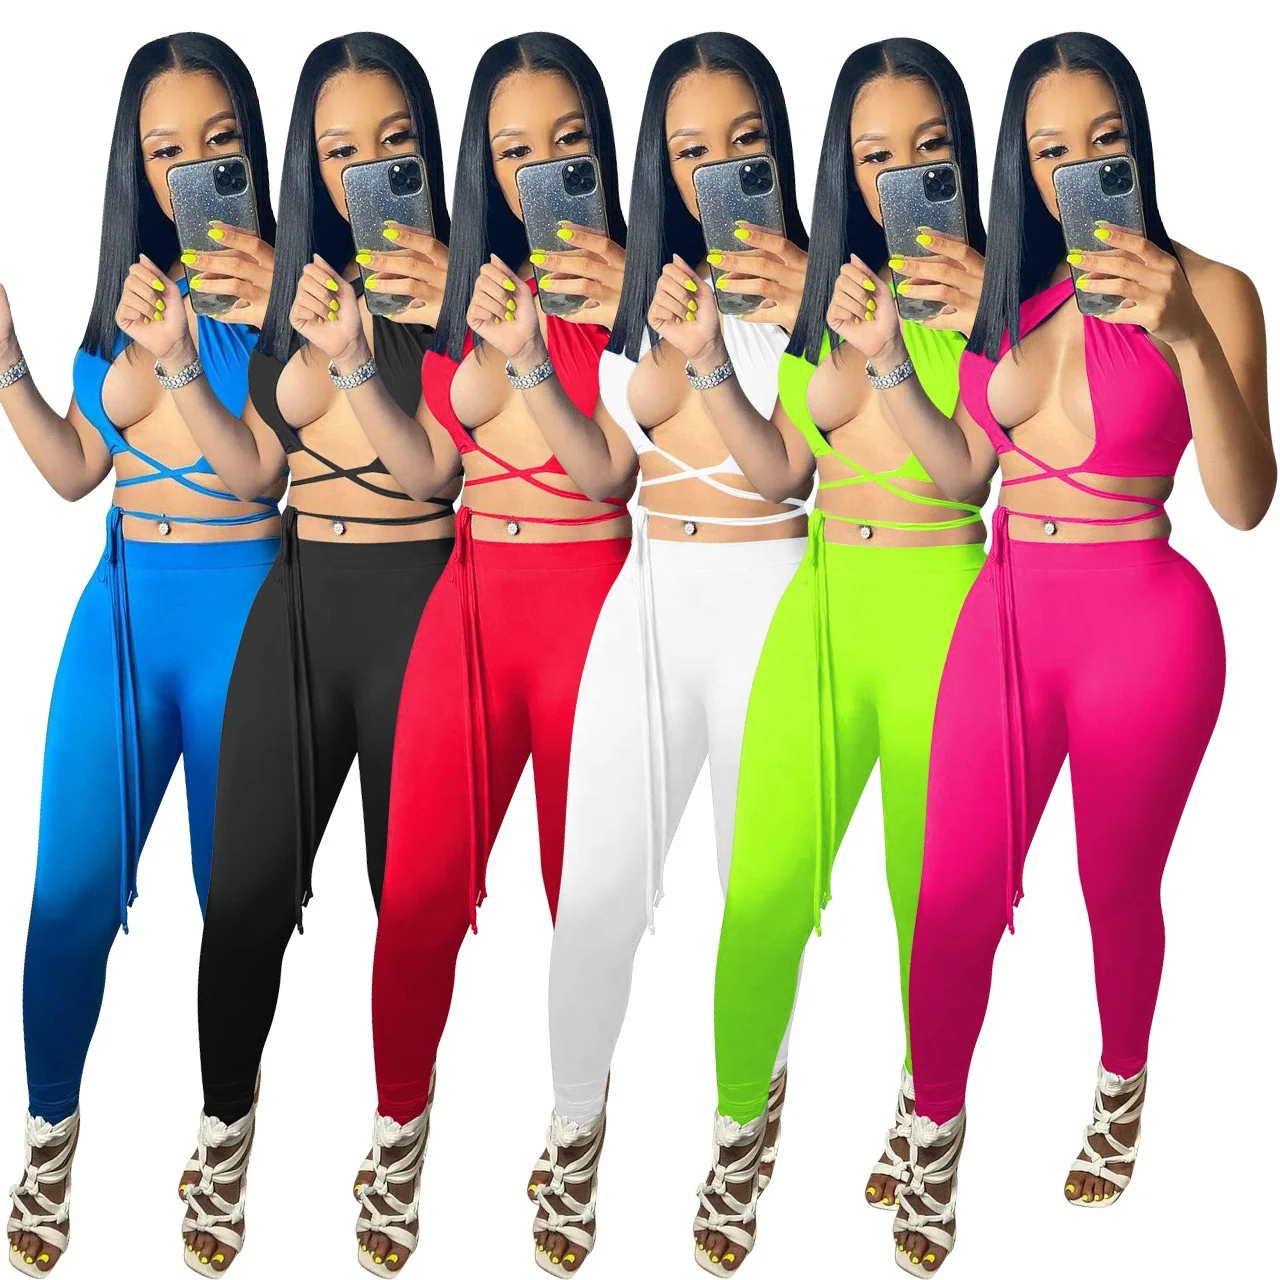 

YS-NK236 Street workout casual comfy 2 piece sweat pants sets for women plain sexy halter crop top two piece pants set summer, As picture shows or customized color